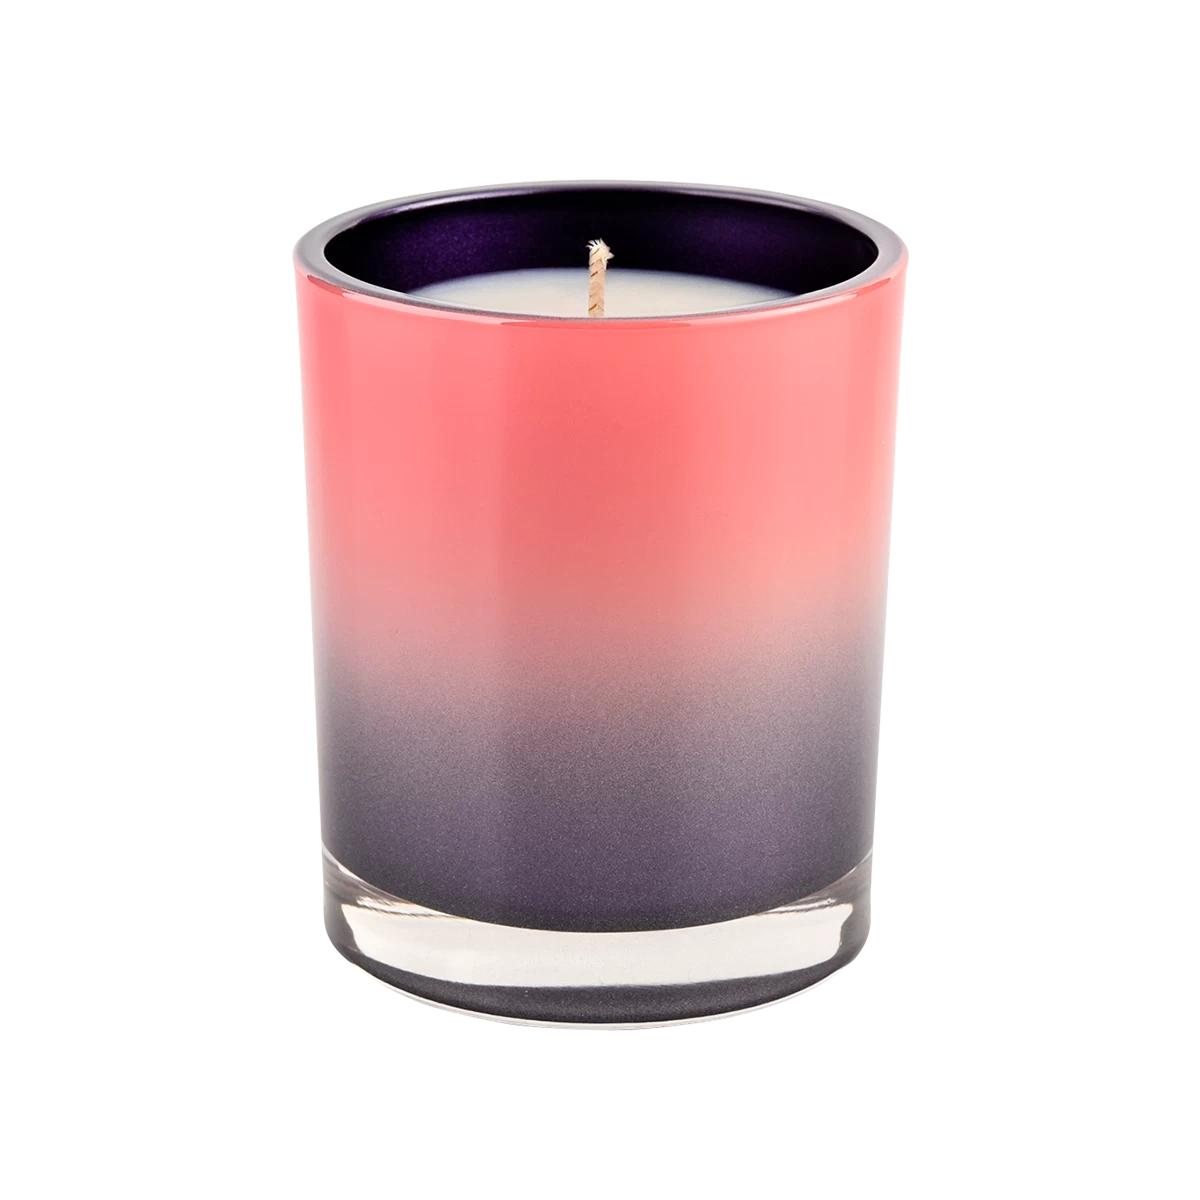 Luxury purple gradient pink glass candle jar inside spray color home decor